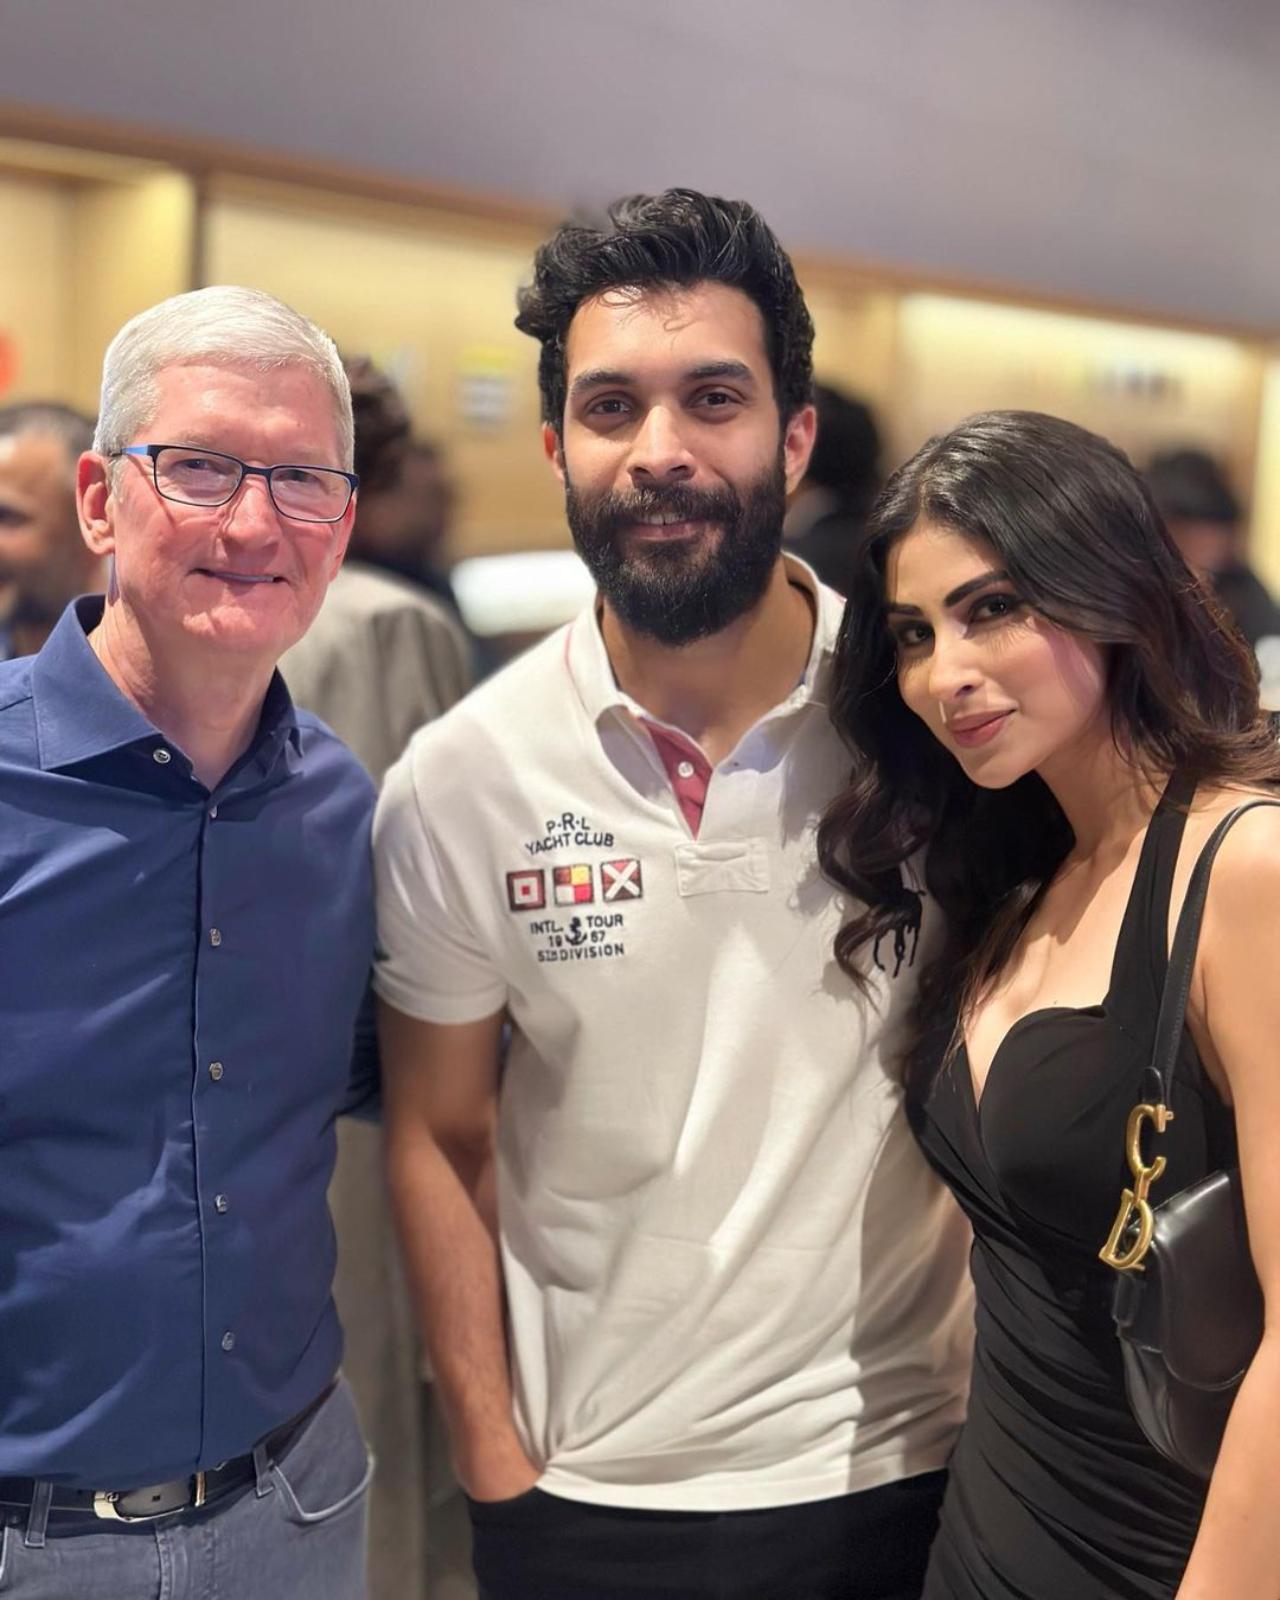 Mouni Roy took to her Instagram handle to share pictures from the event. In the first picture, she and her husband Suraj Nambiar can be seen posing with Tim Cook. Mouni also shared pictures of herself posing with AR Rahman and Madhuri Dixit. 